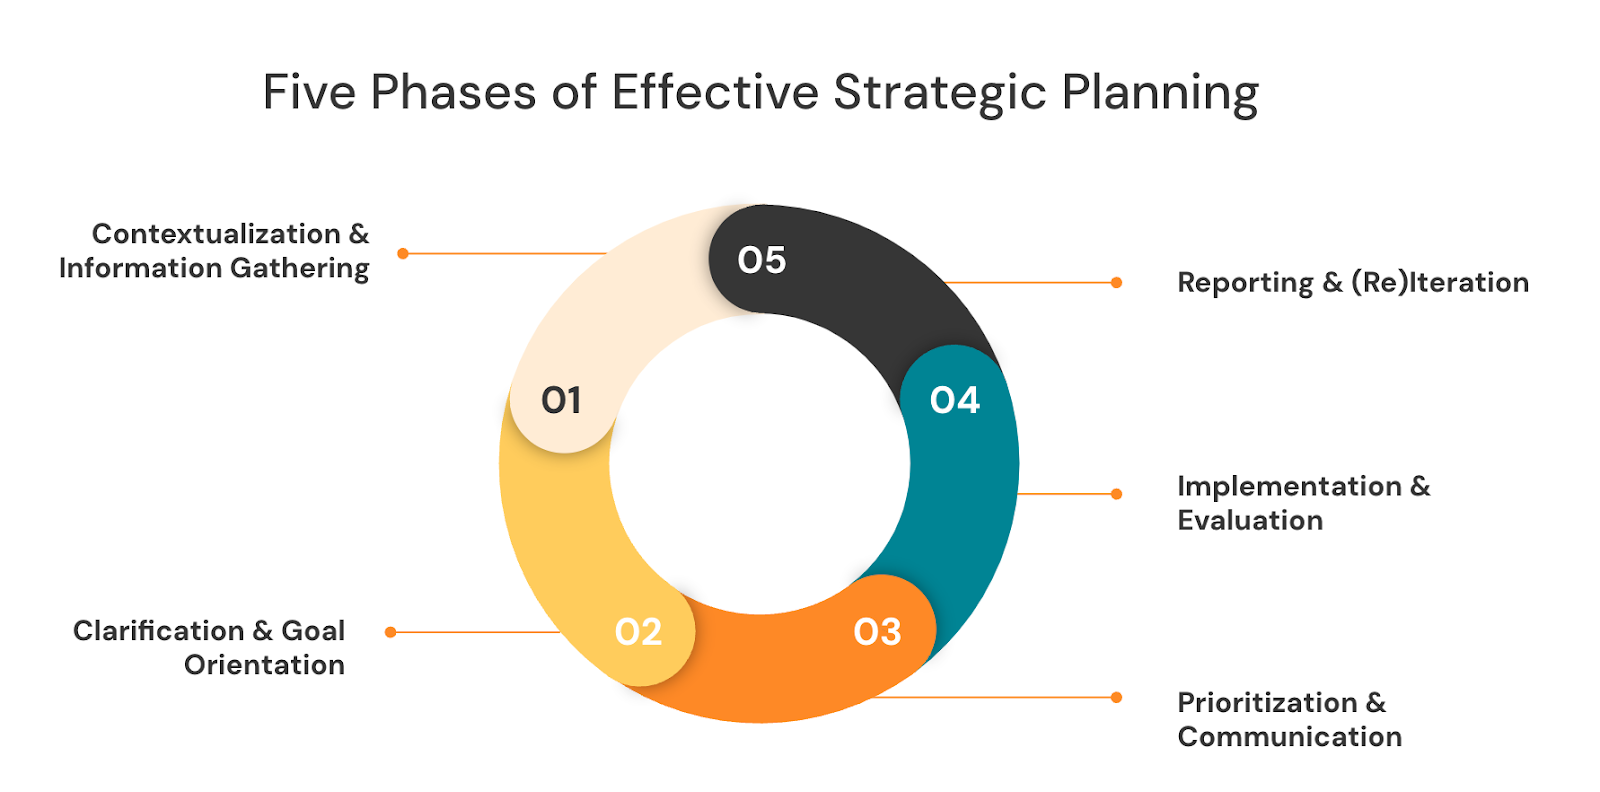 A colored wheel showing the Five Phases of Effective Strategic Planning. In order: contextualization & information gathering, clarification and goal orientation, prioritization and communication, implementation and evaluation, and reporting and (re)iteration.